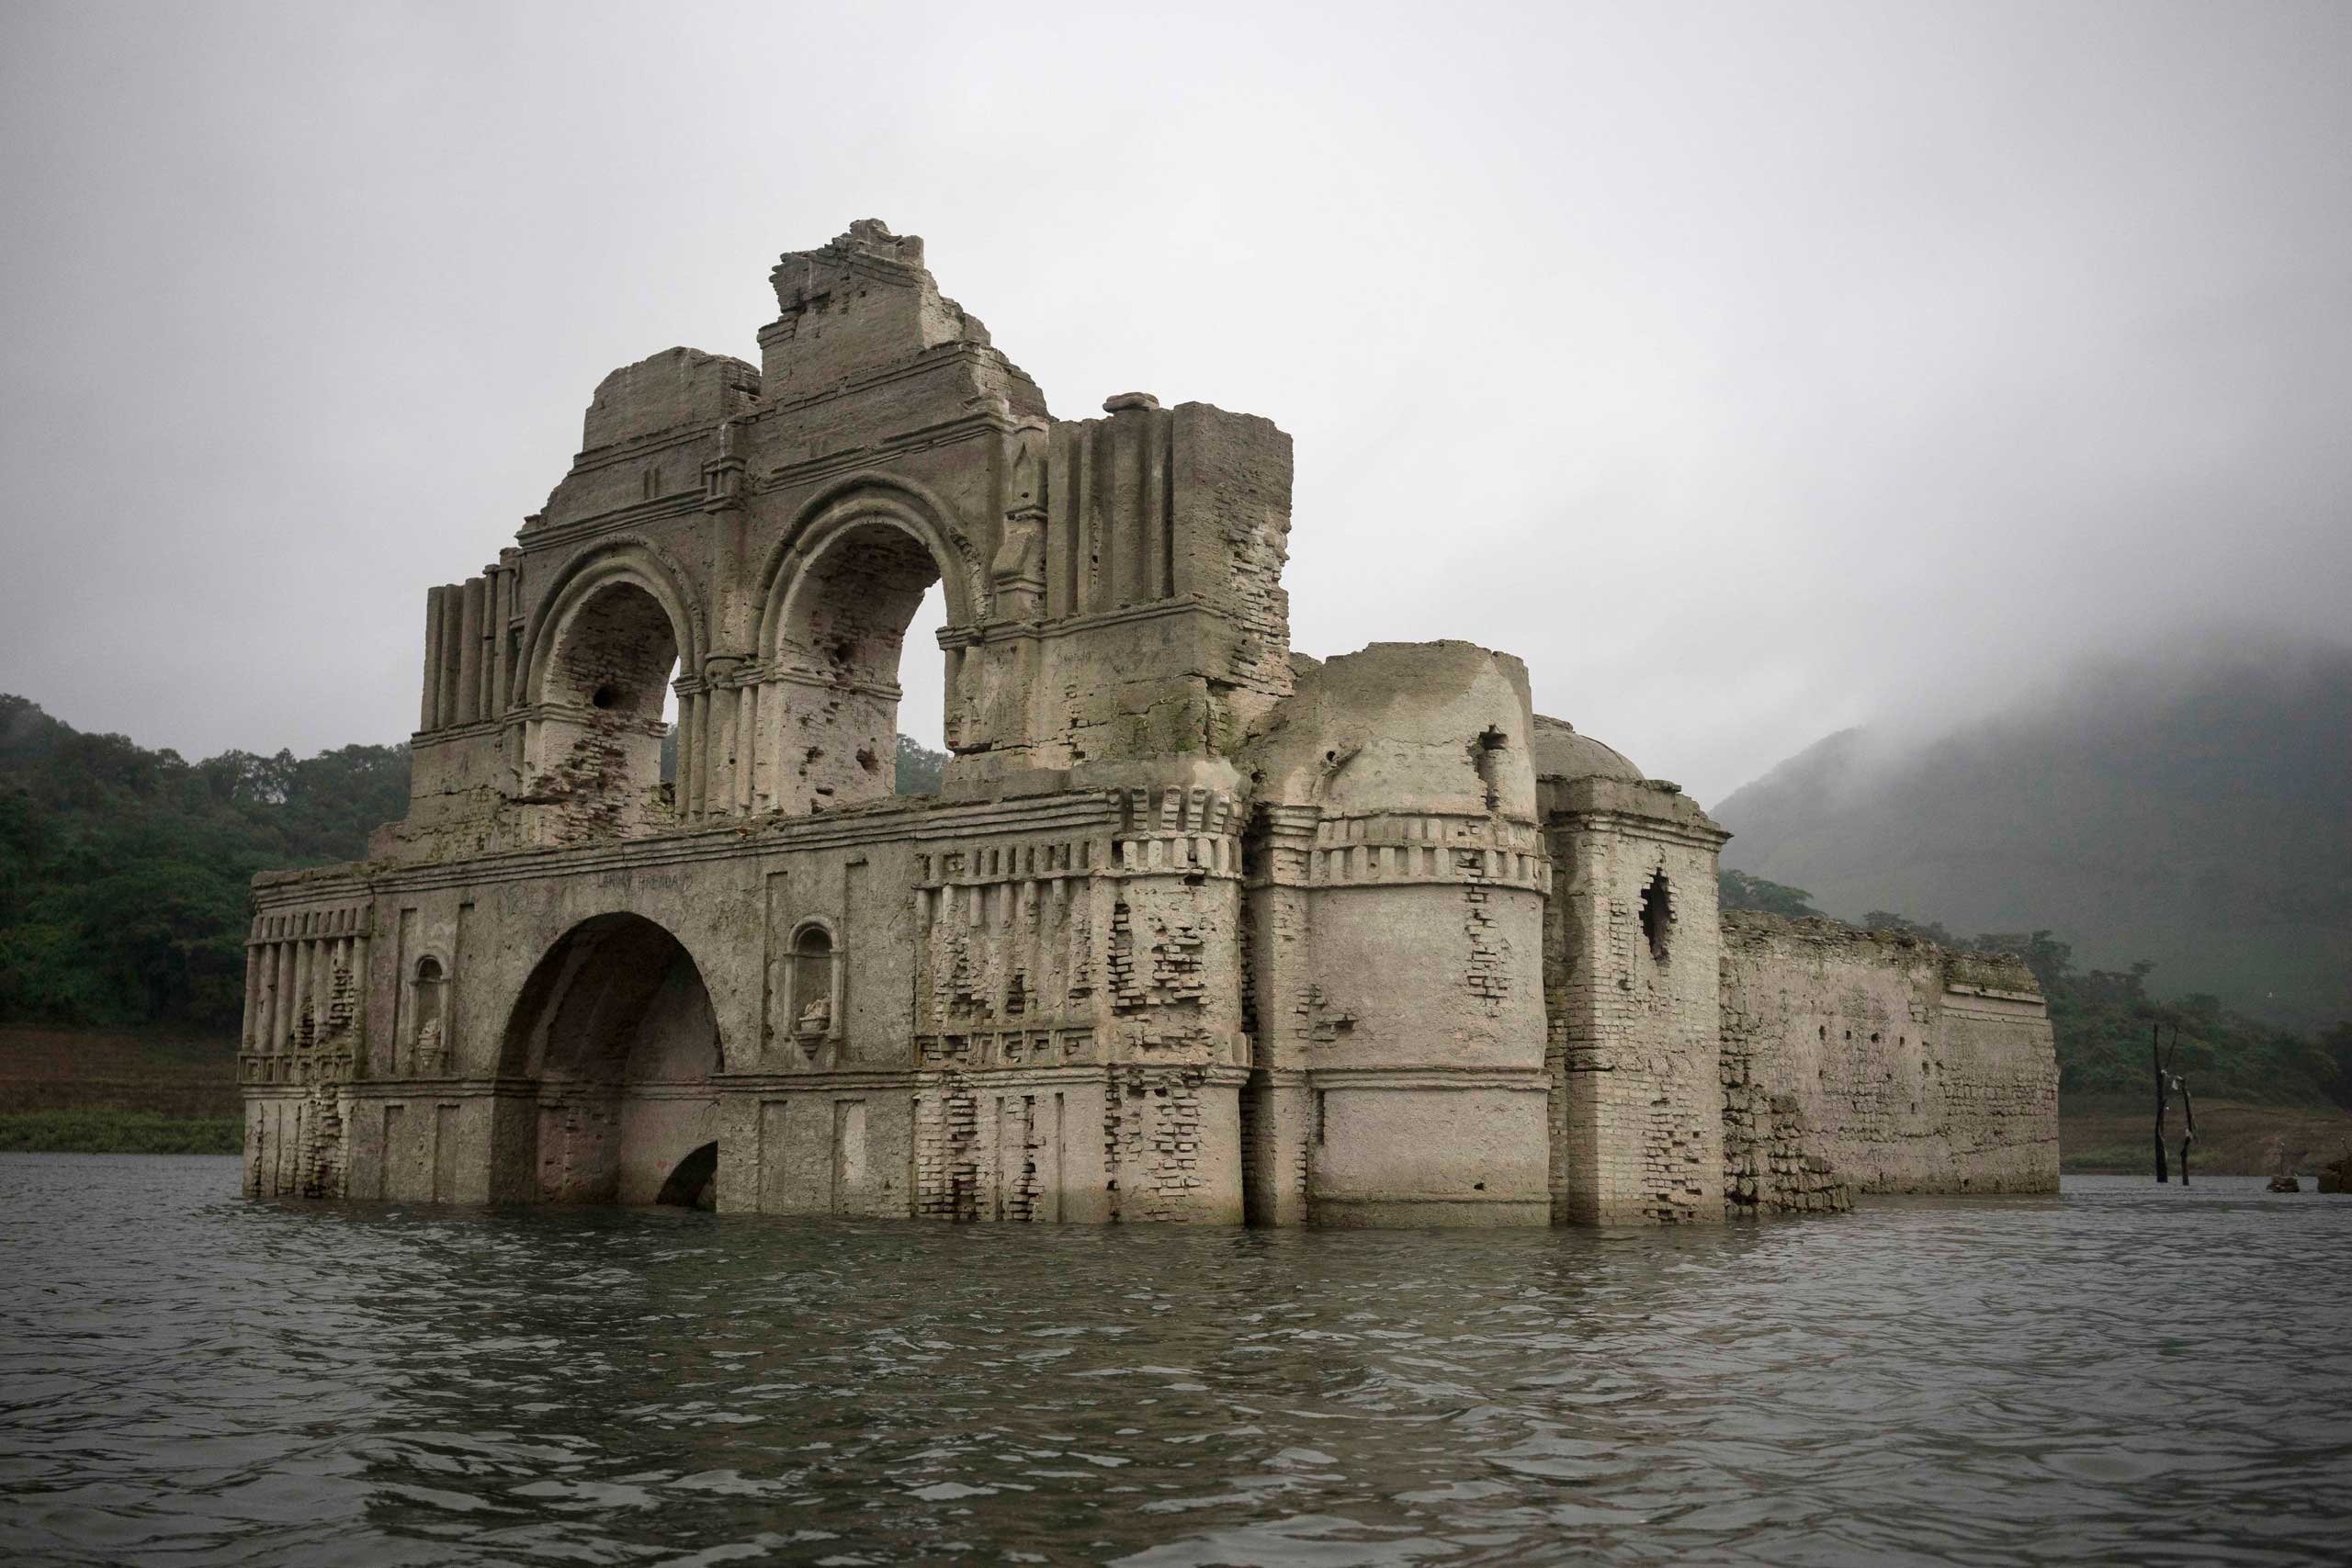 The remains of a mid-16th century church known as the Temple of Santiago, as well as the Temple of Quechula, is visible from the surface of the Grijalva River, which feeds the Nezahualcoyotl reservoir, due to the lack of rain near the town of Nueva Quechula, in Chiapas state, Mexico, Oct. 16, 2015. (David von Blohn—AP)